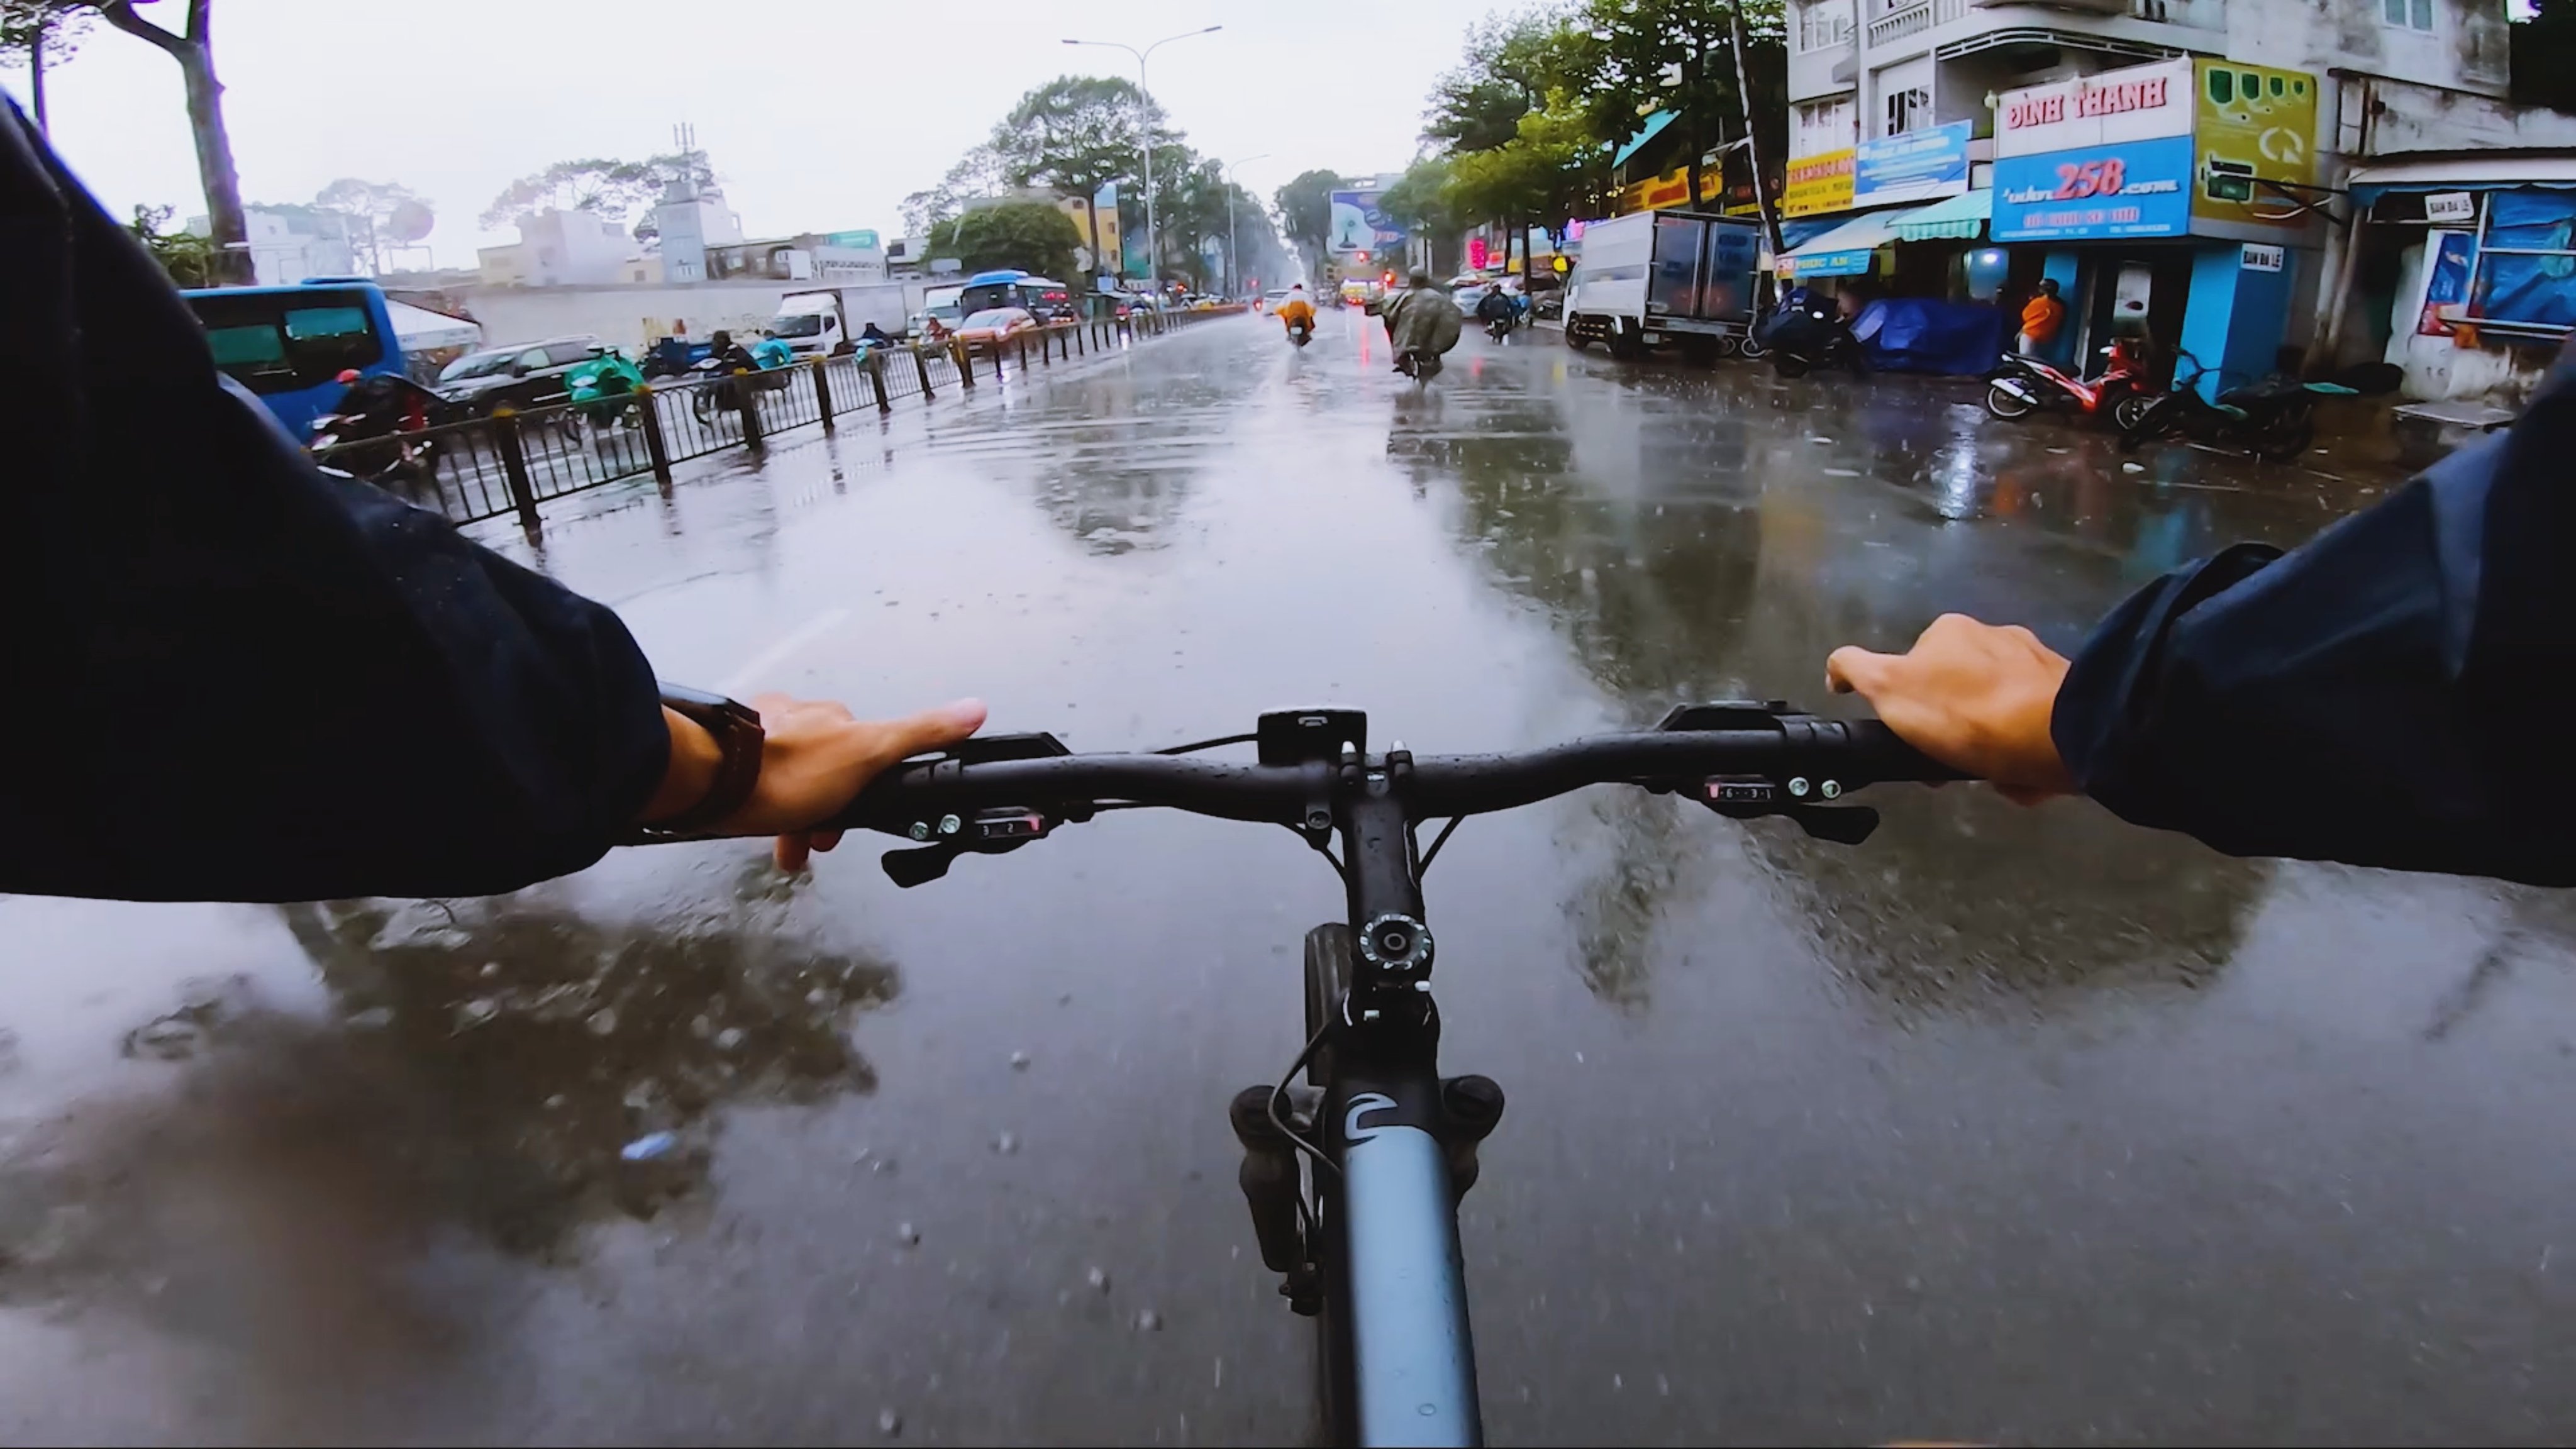 [Video test] -  Cycling in the rain - Gopro7